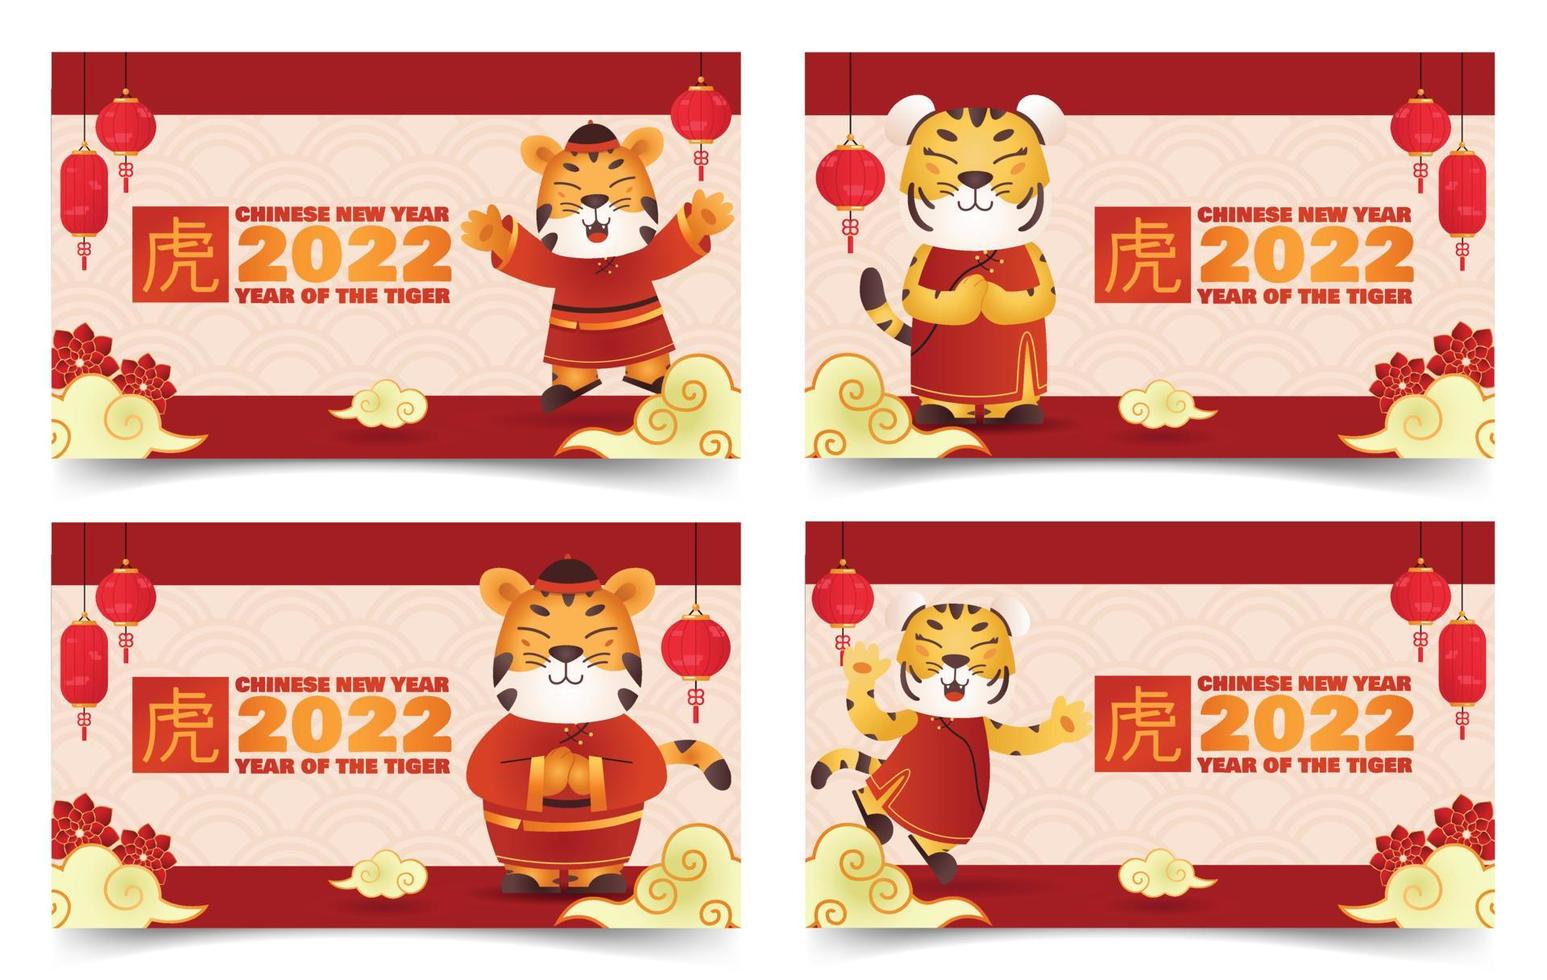 2022 chinese new year greeting card and banner bundle pack, year of the tiger. With cute tiger mascot character and zodiac stamp. vector